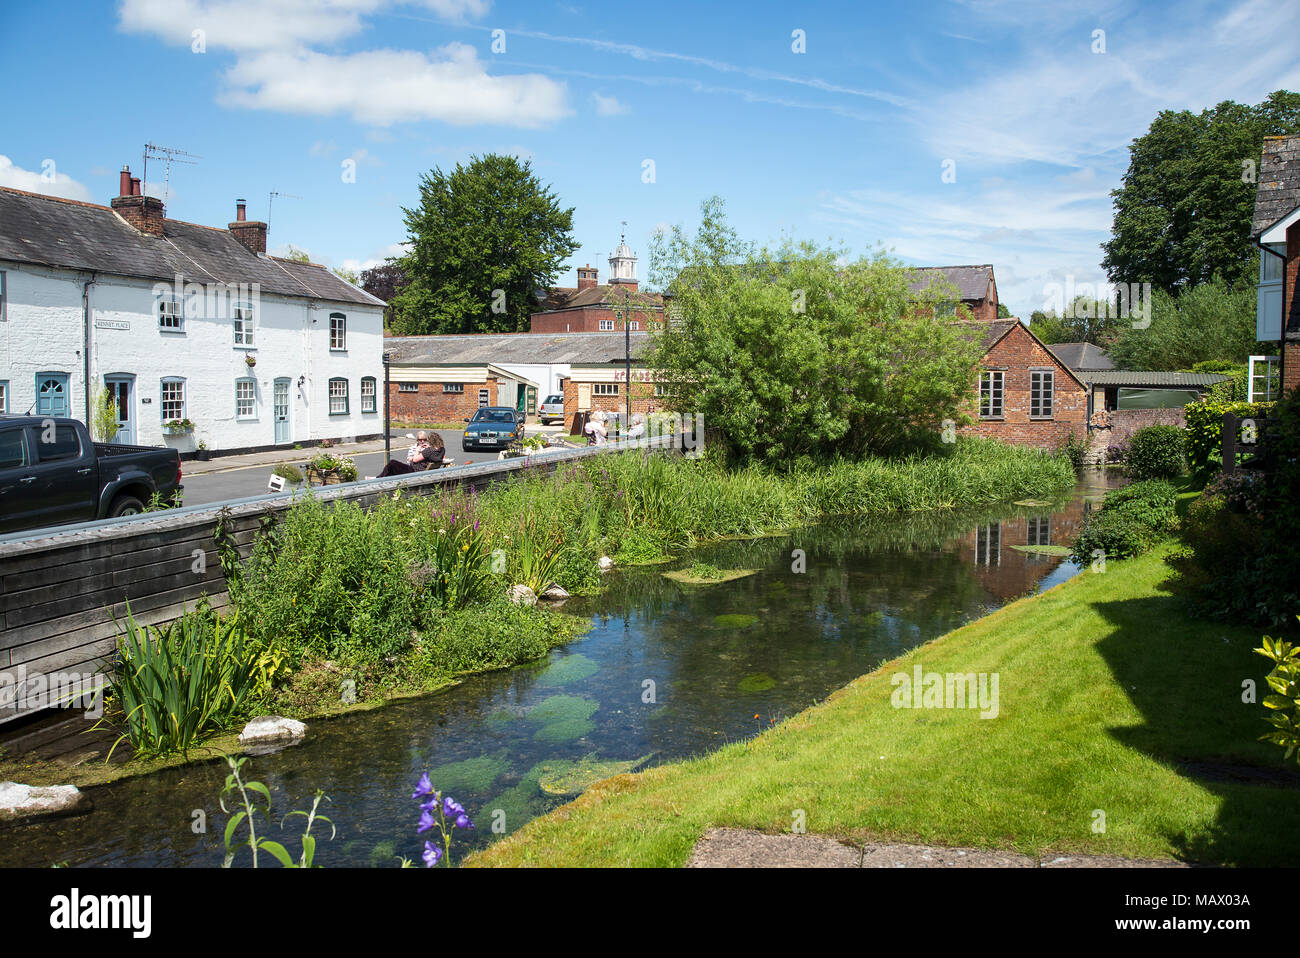 The River Kennet flows through the old town of Marlborough in Wiltshire England UK4 Stock Photo